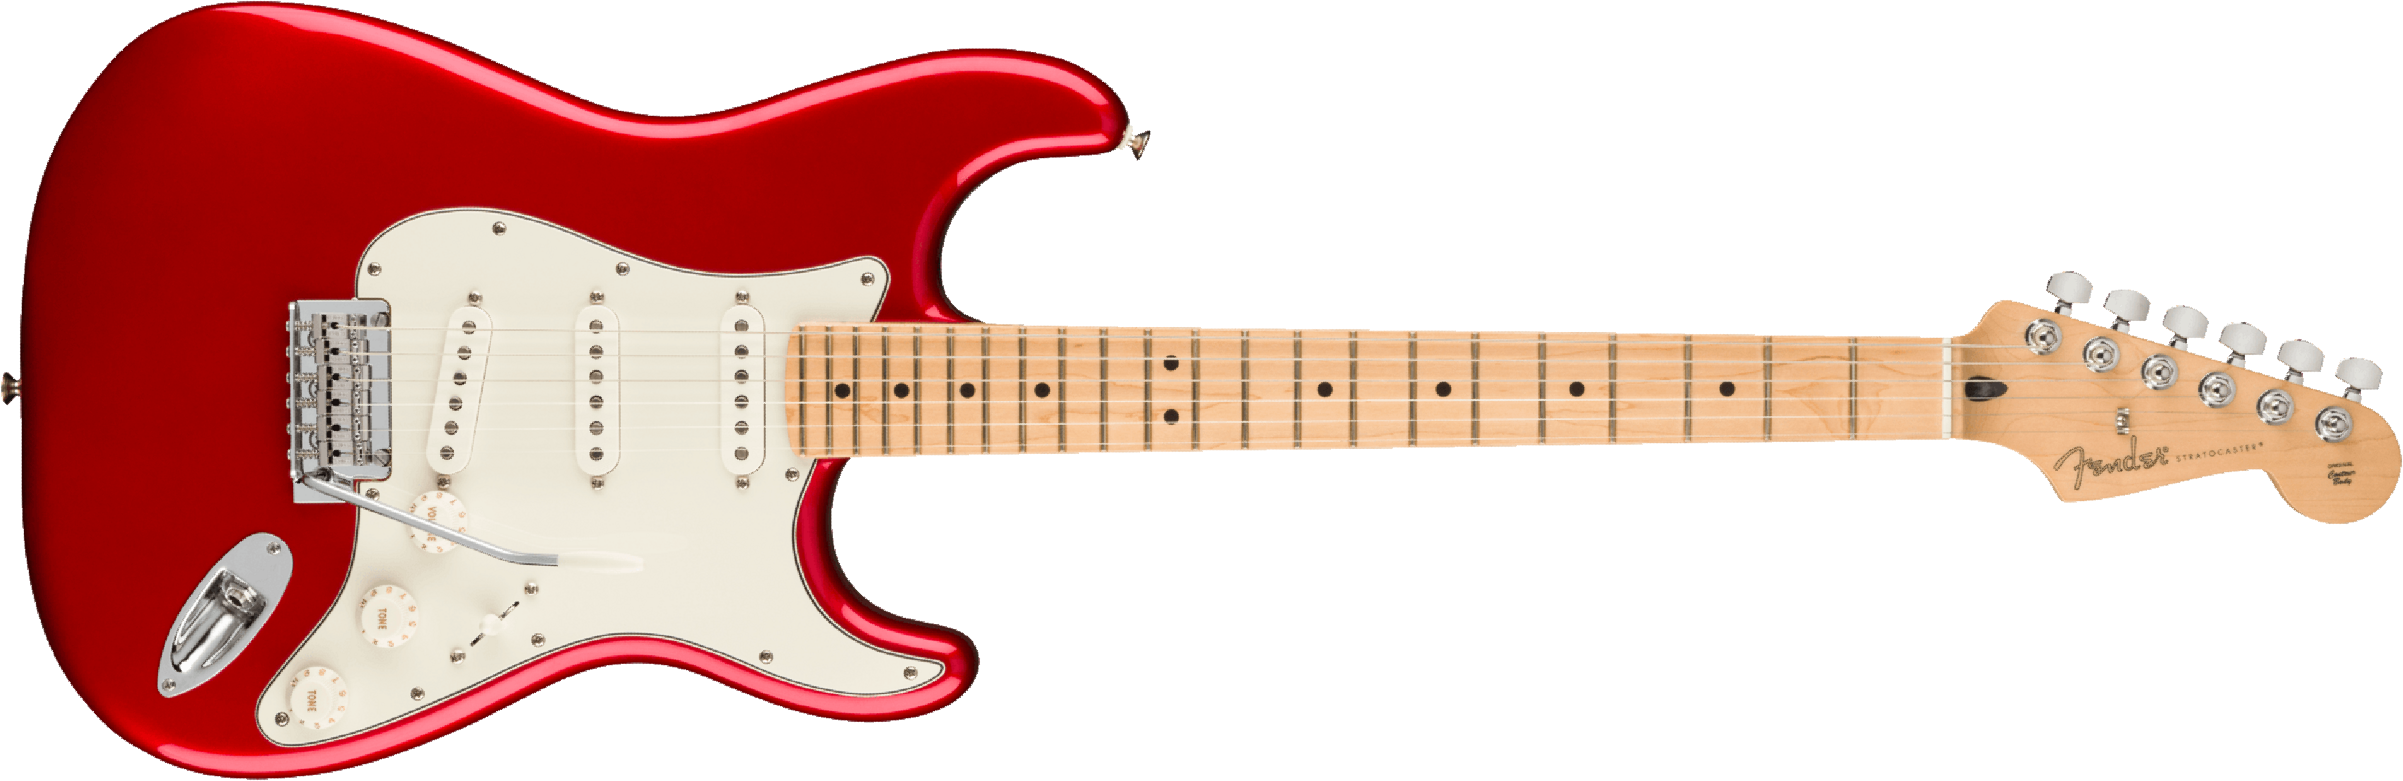 Fender Strat Player Mex 2023 3s Trem Mn - Candy Apple Red - E-Gitarre in Str-Form - Main picture